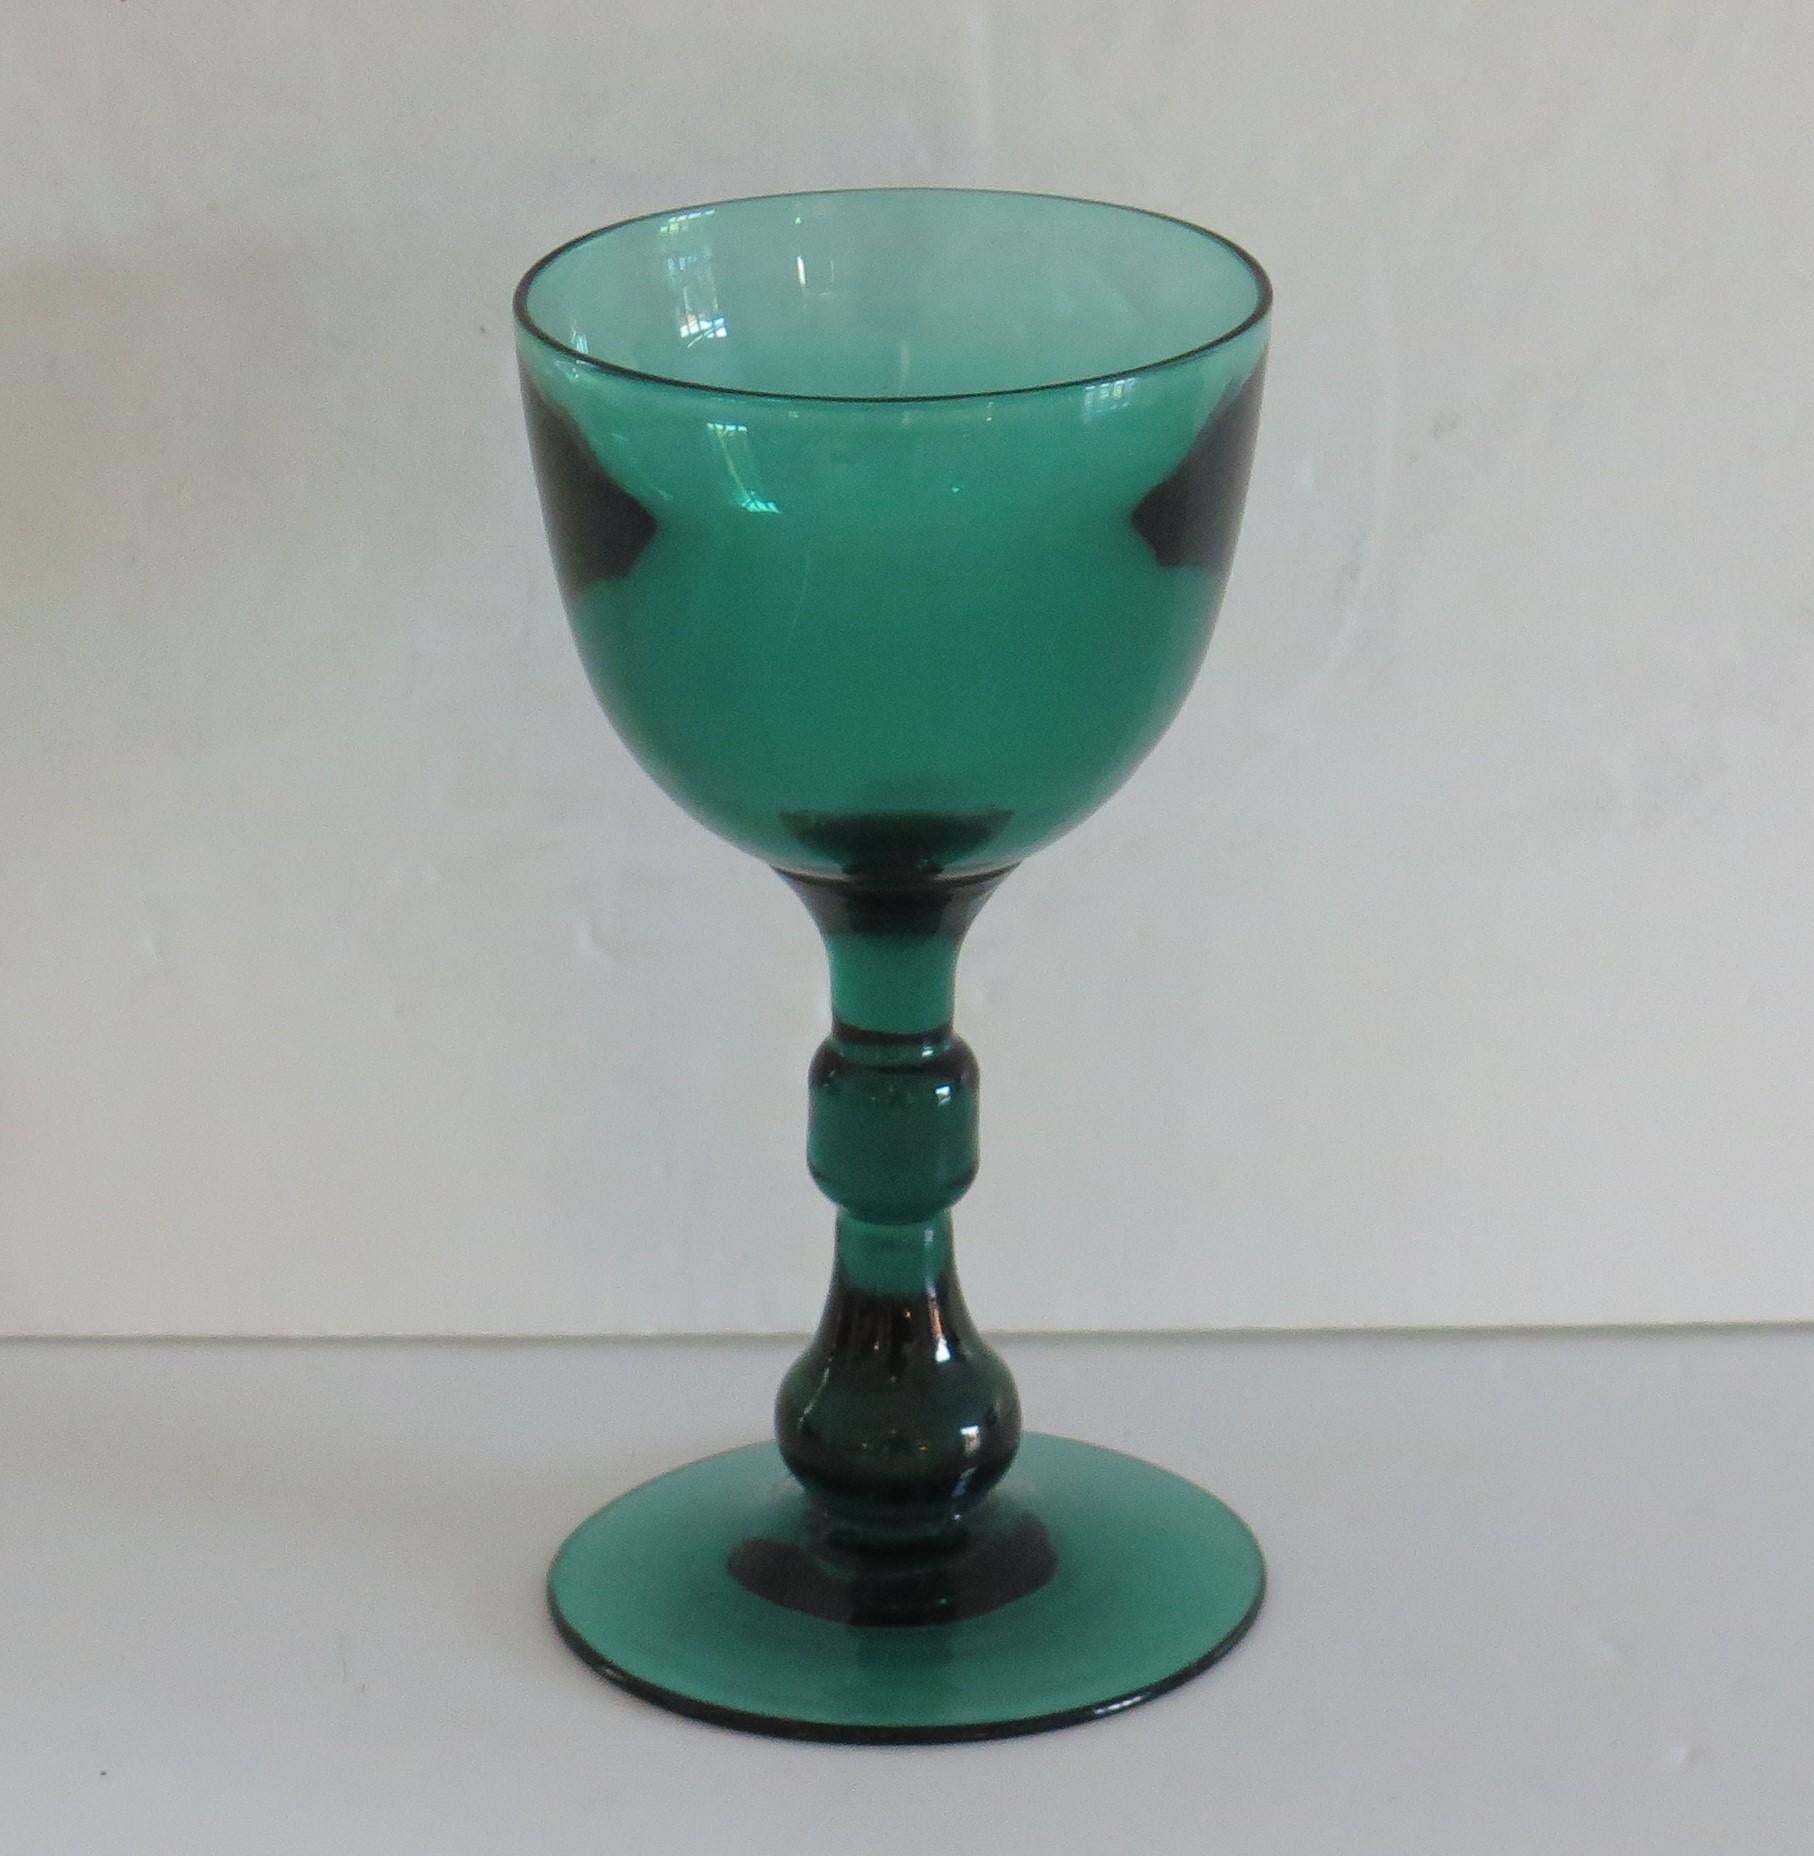 This is an excellent example of an early 19th century, English, hand blown, Bristol green wine drinking glass which we date to the George 111rd Regency period, circa 1815.

This glass has an elegant open round funnel bowl with a very interesting